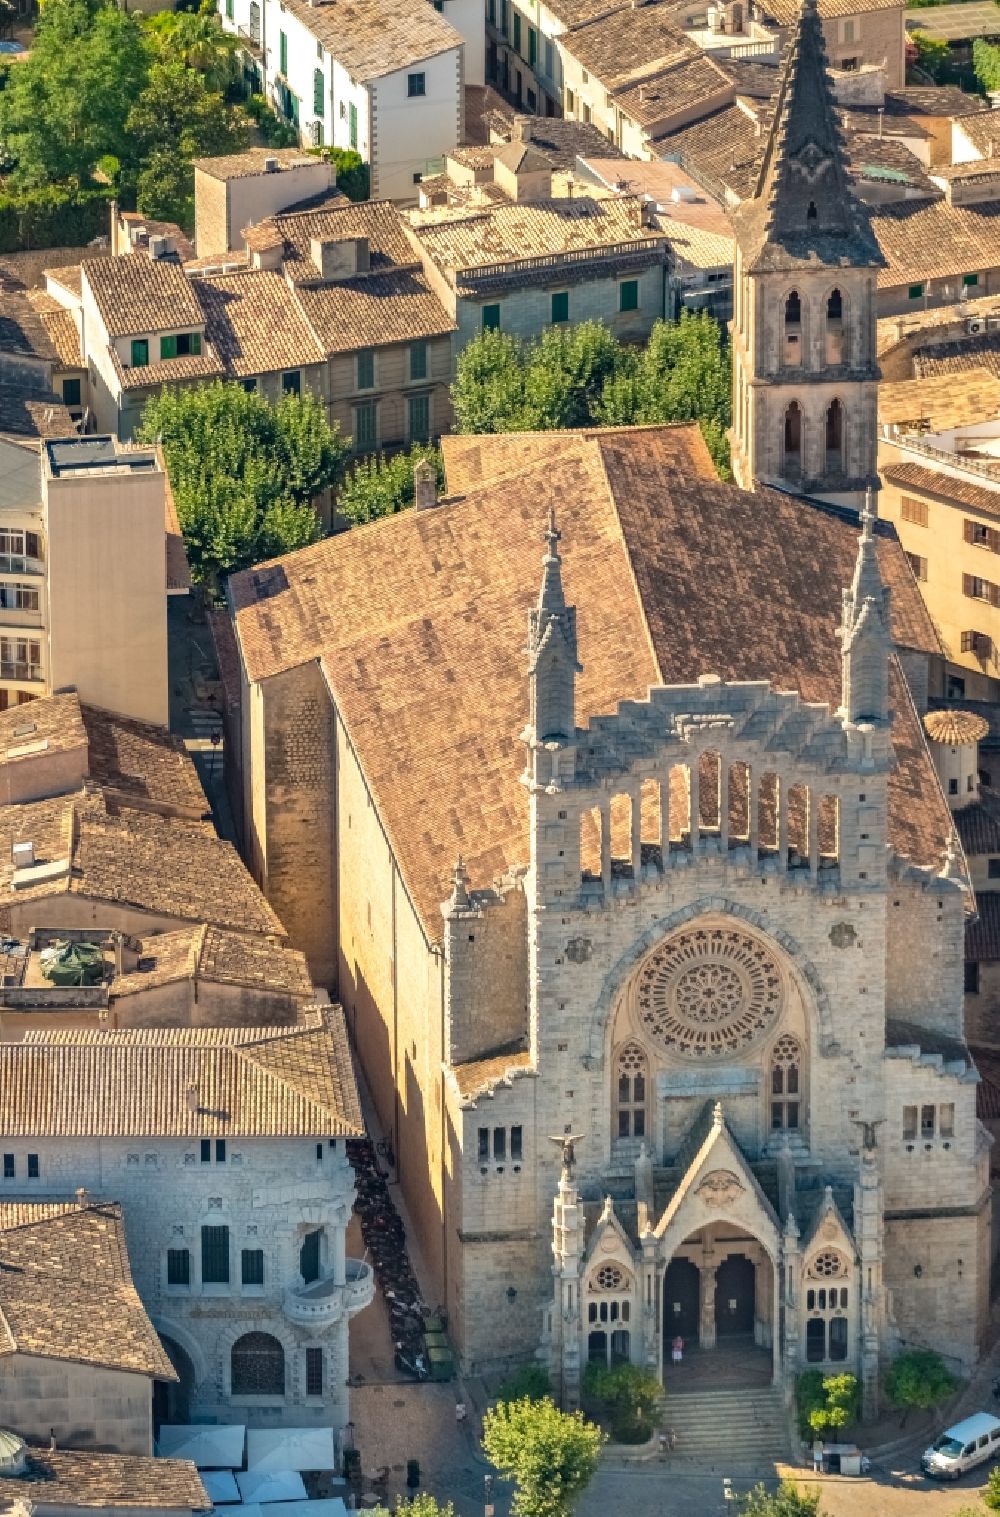 Aerial image Soller - Church building St. Bartholomaeus on Plaza ConstituciA?n in the village of in Soller in Balearic Islands, Spain